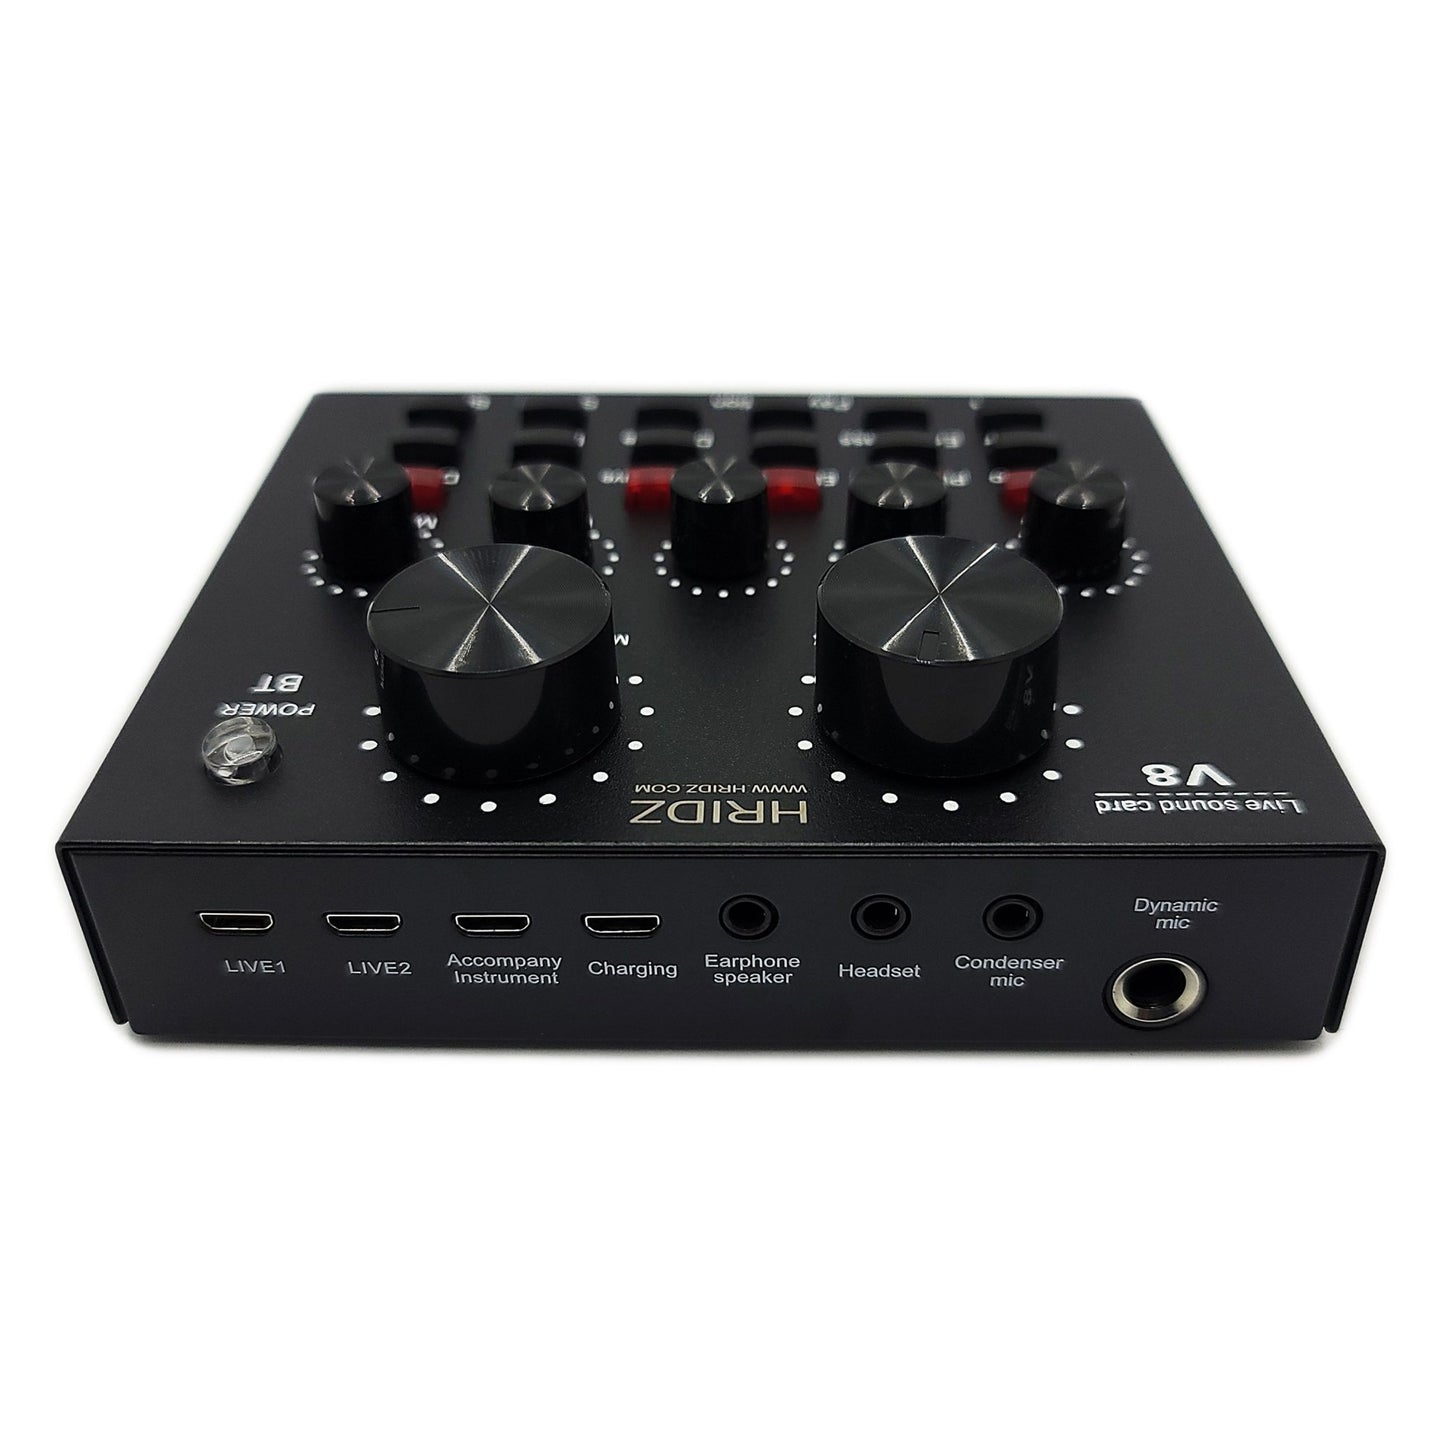 Hridz V8 Sound Card Bluetooth Sound Mixer Board for Live Streaming with Effects